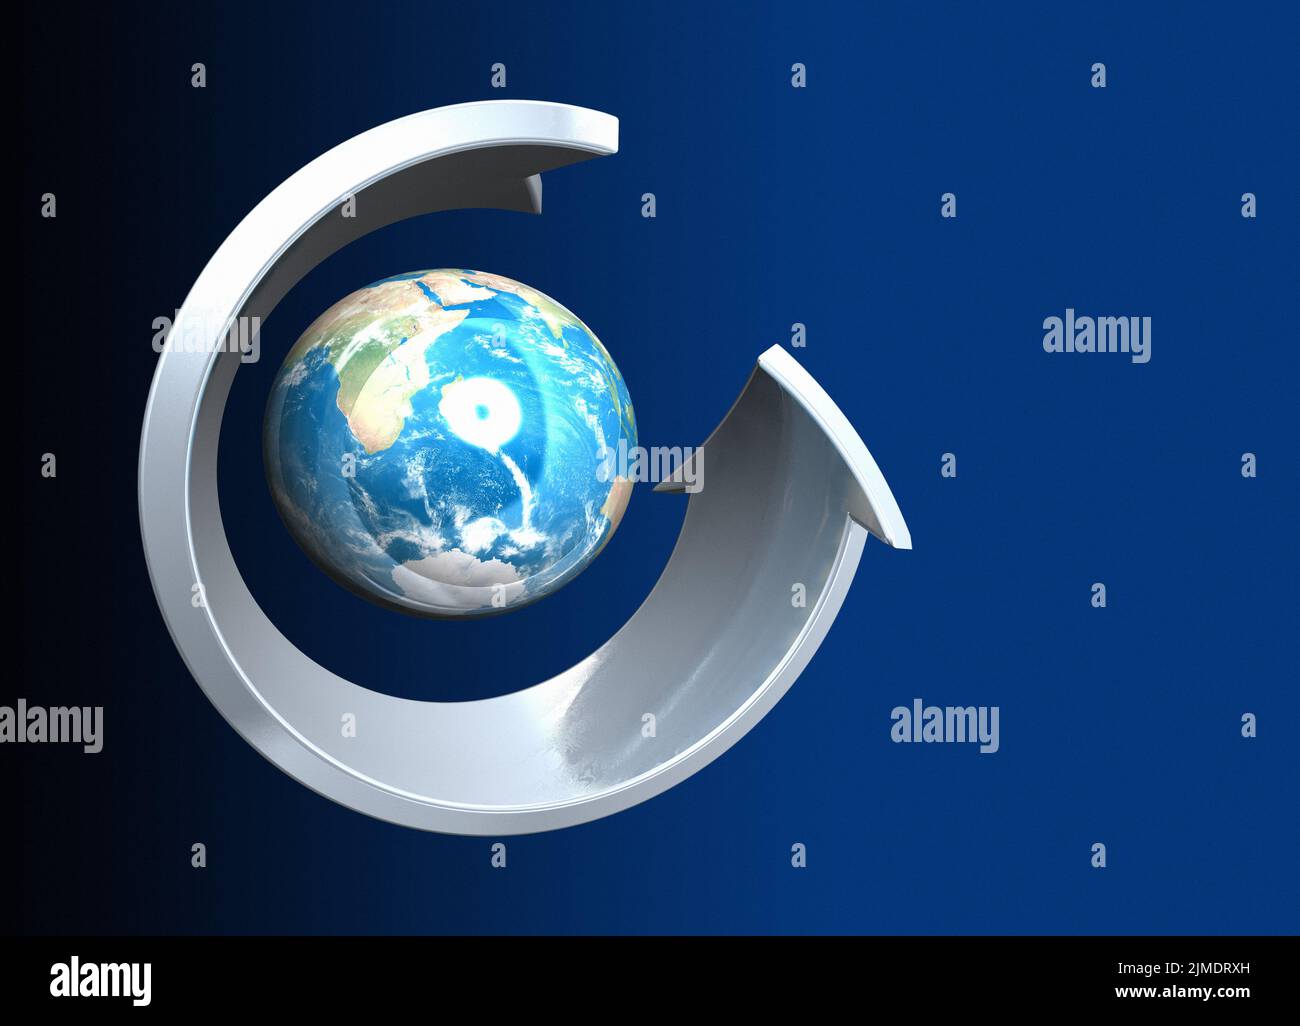 Earth and direction sign, illustration. Stock Photo